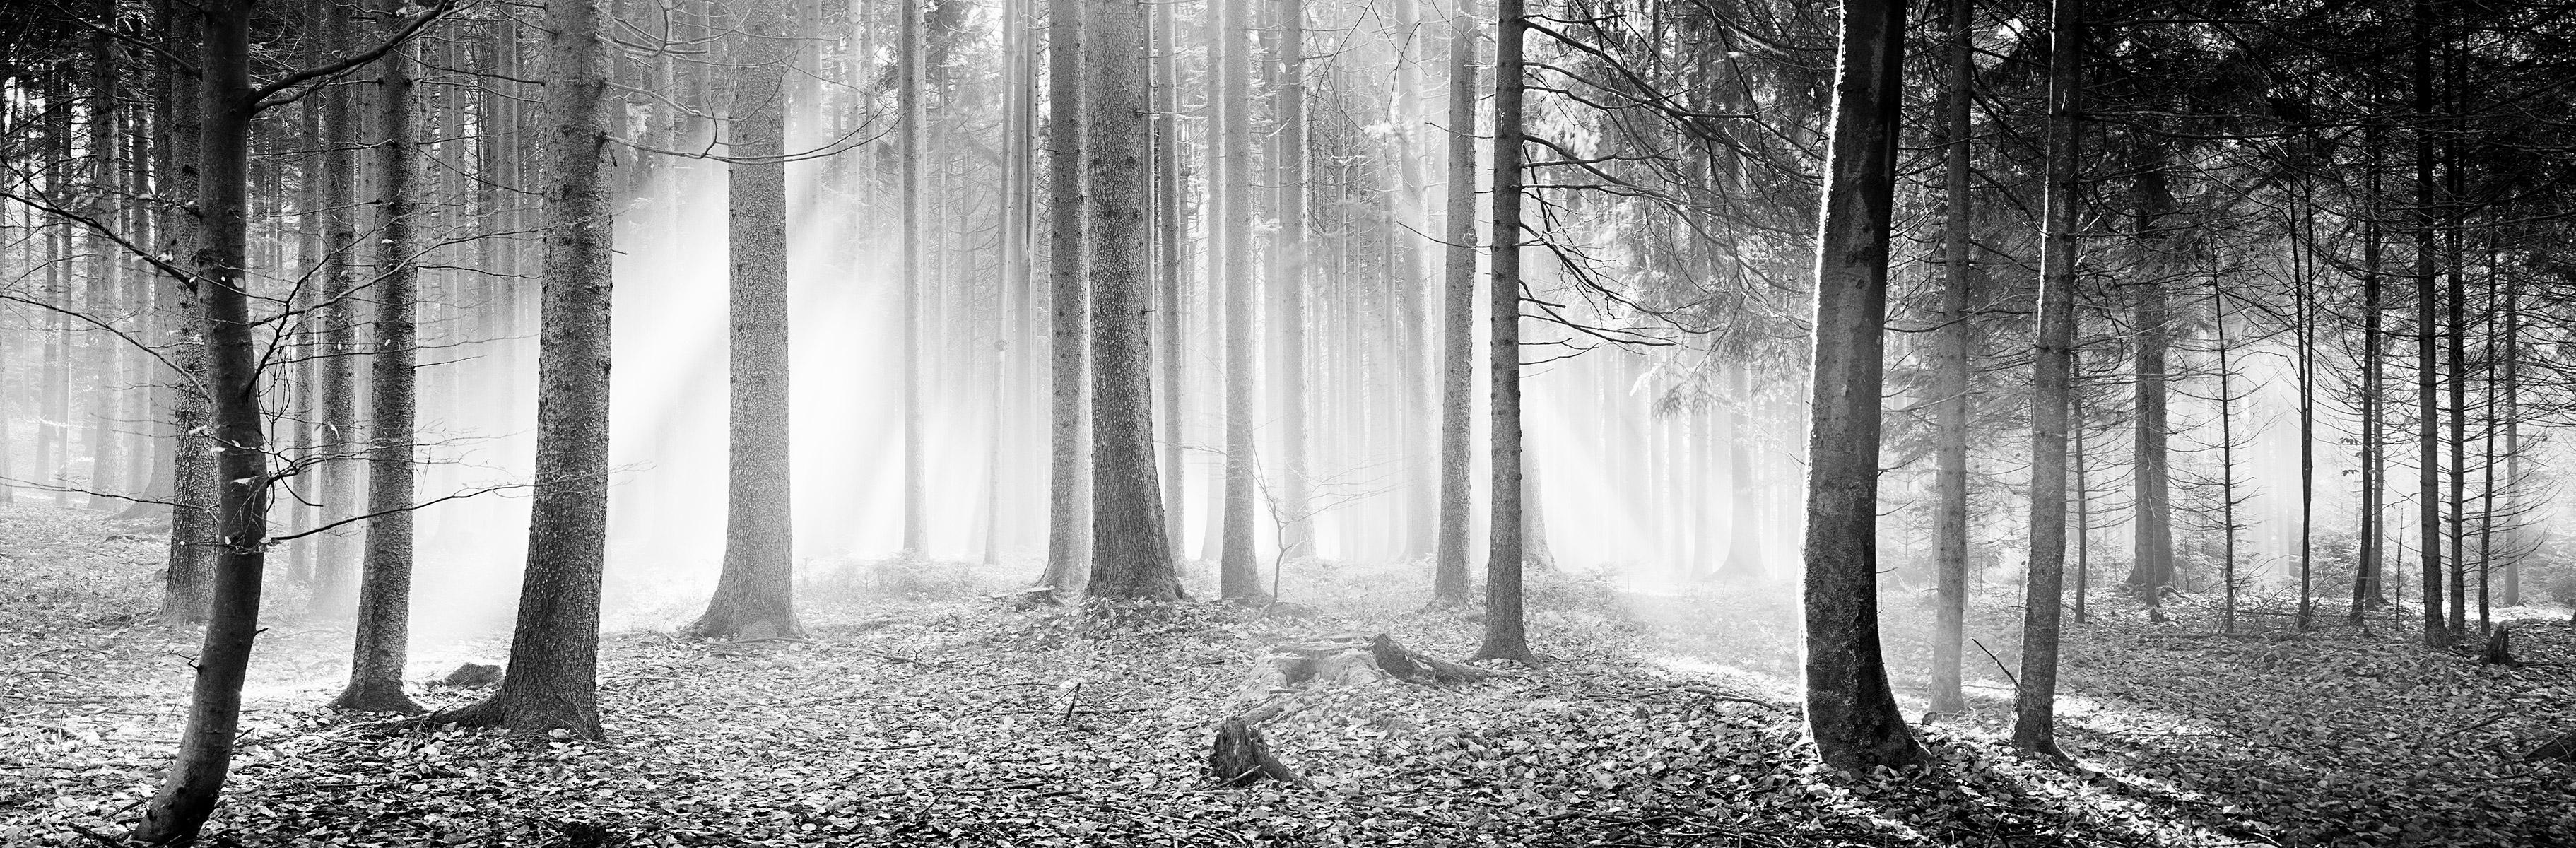 Gerald Berghammer, Ina Forstinger Landscape Photograph - Enchanted Forest, Austria, black and white photography, sunny, foggy, landscapes